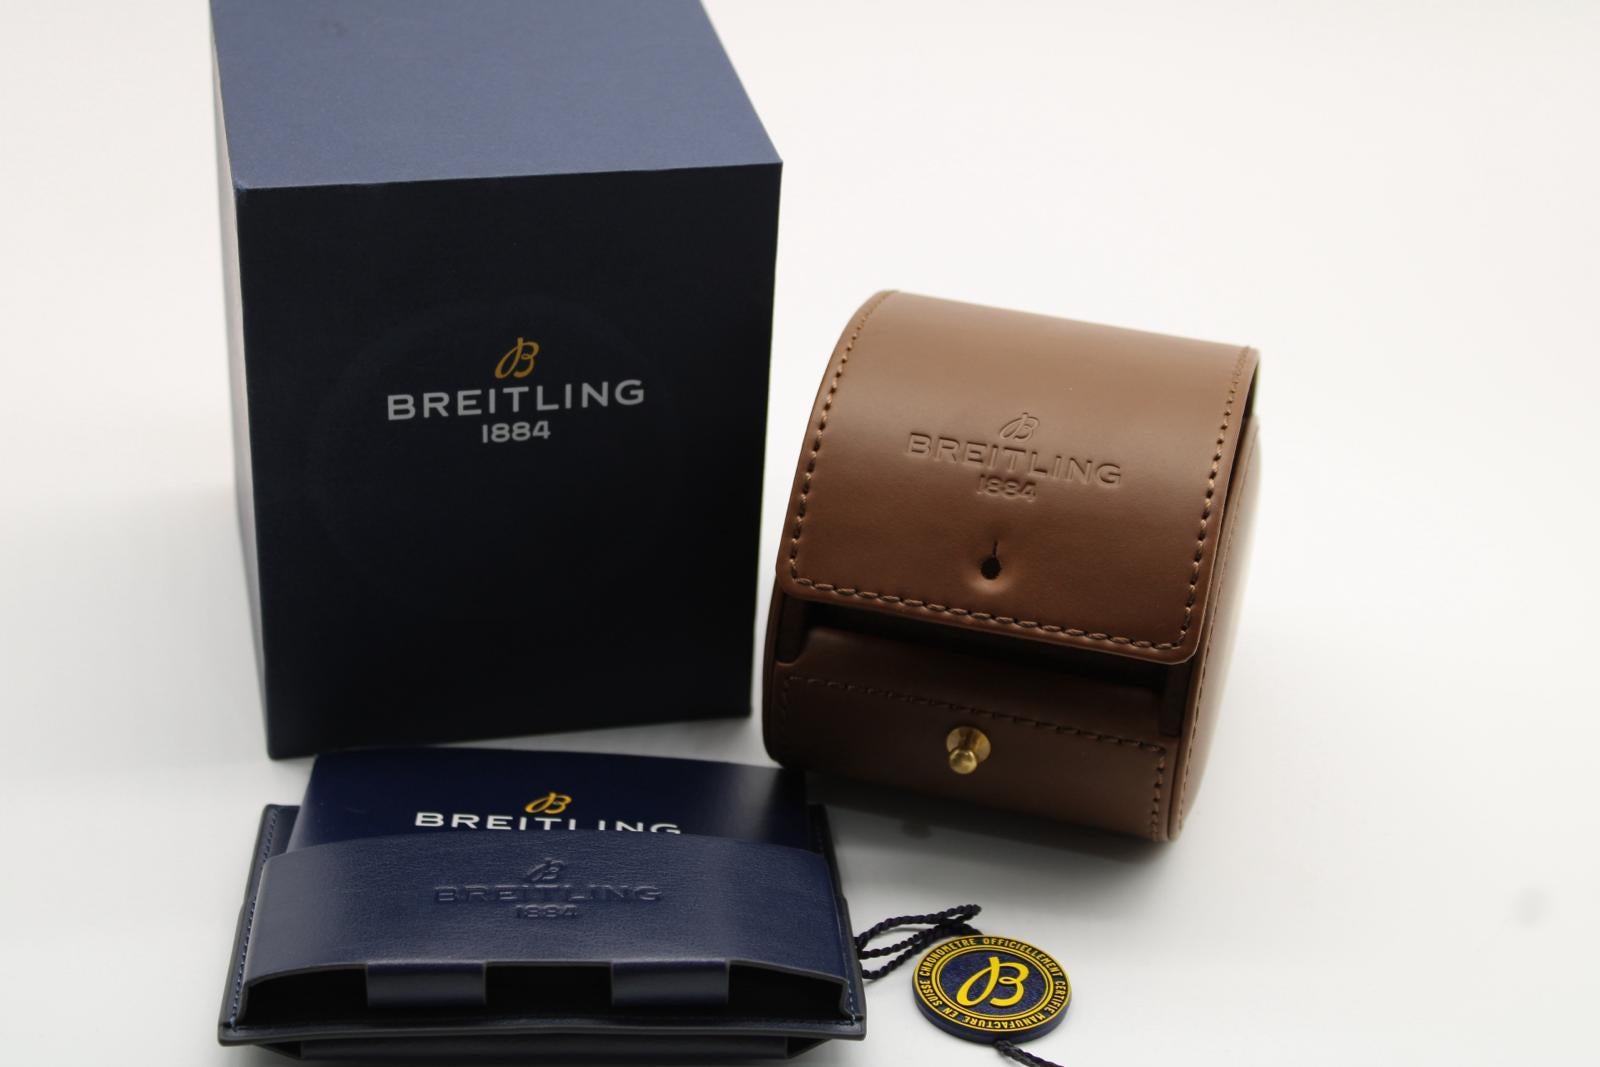 The Breitling Endurance Pro offers great value in a watch as well as being different and durable. This model the X82310 comes with the red strap. The watch is accompanied with its original inner and outer boxes, swing tag, wallet and card dated